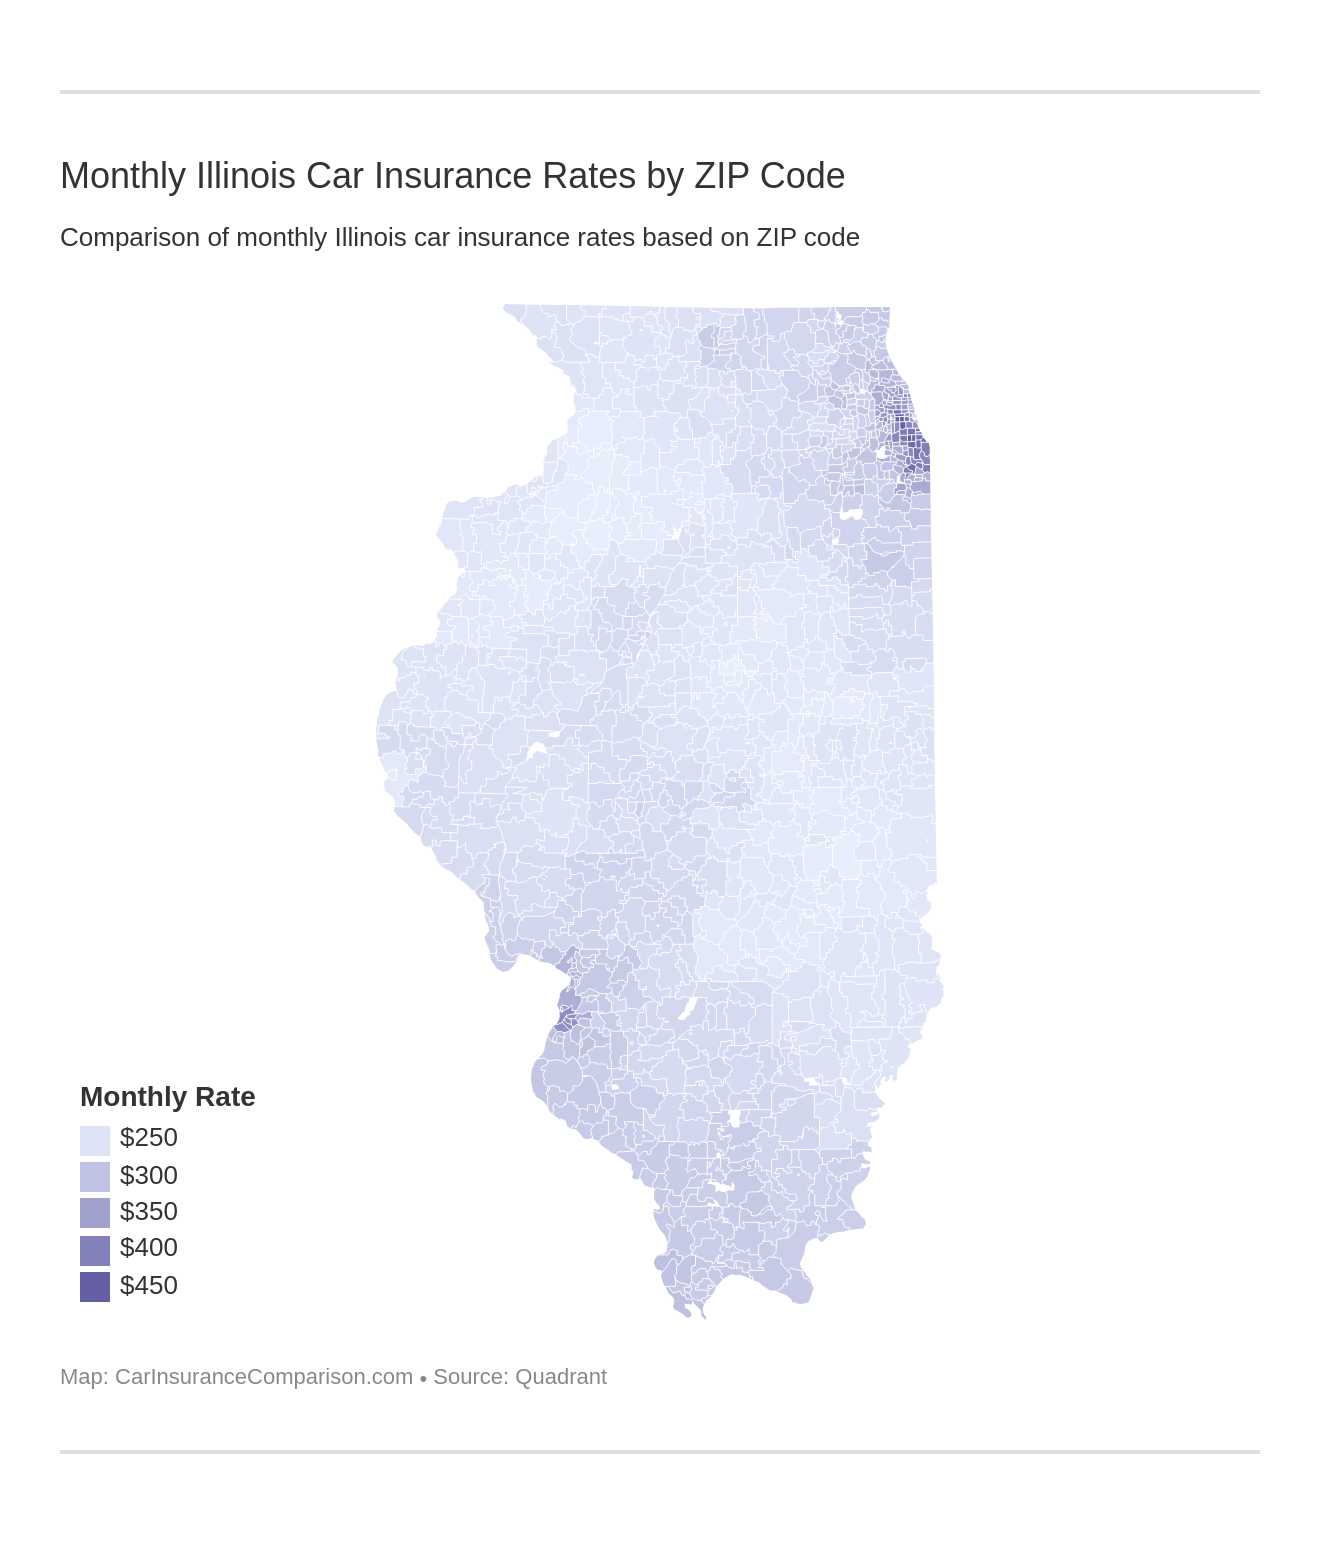 Monthly Illinois Car Insurance Rates by ZIP Code